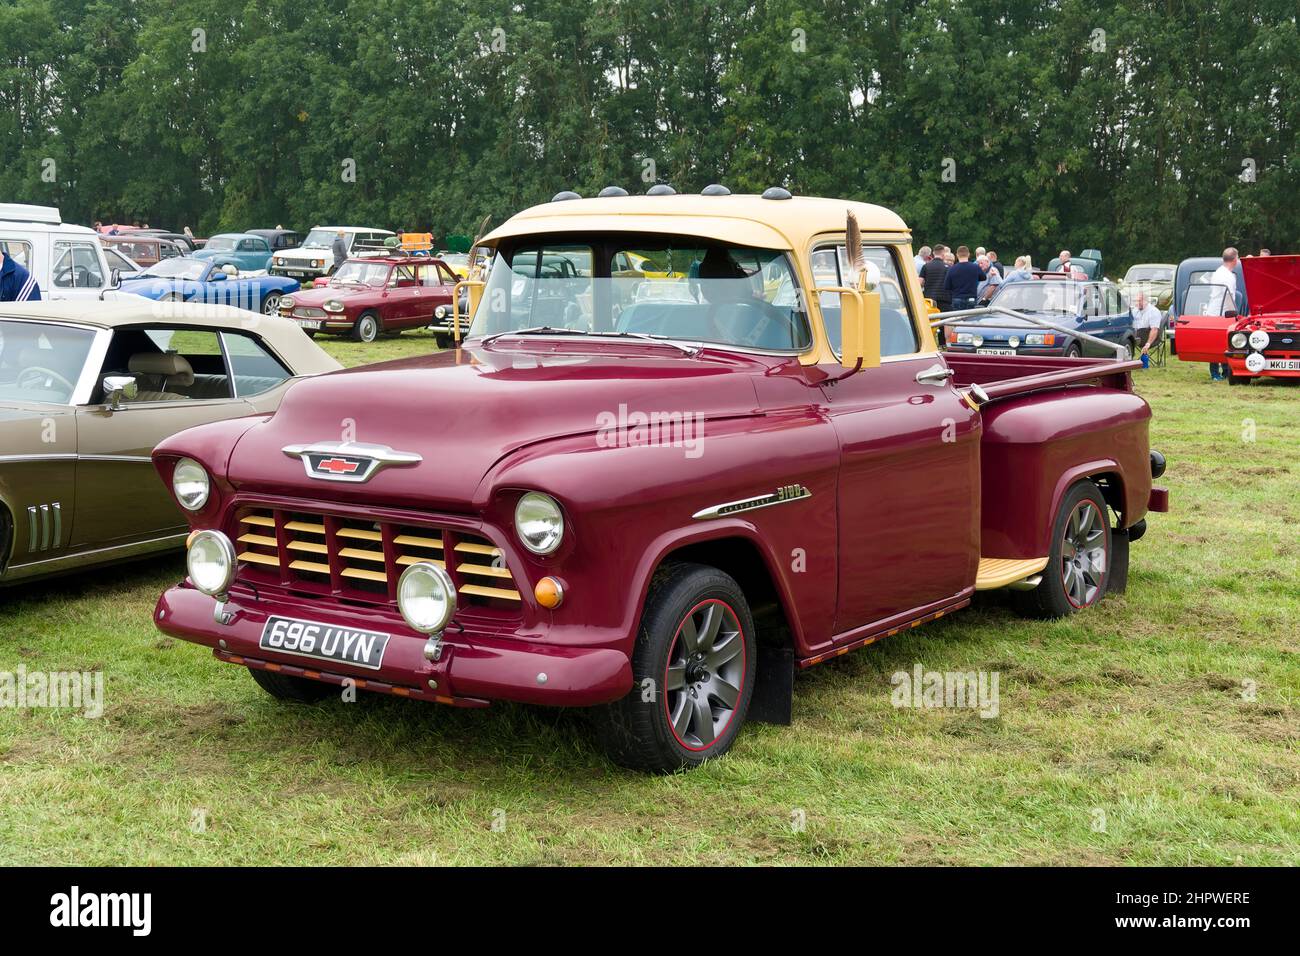 Westbury, Wiltshire, UK - September 5 2021: A 1955 Chevrolet Apache Pick Up truck at the 2021 White Horse Classic and Vintage Vehicle Show Stock Photo